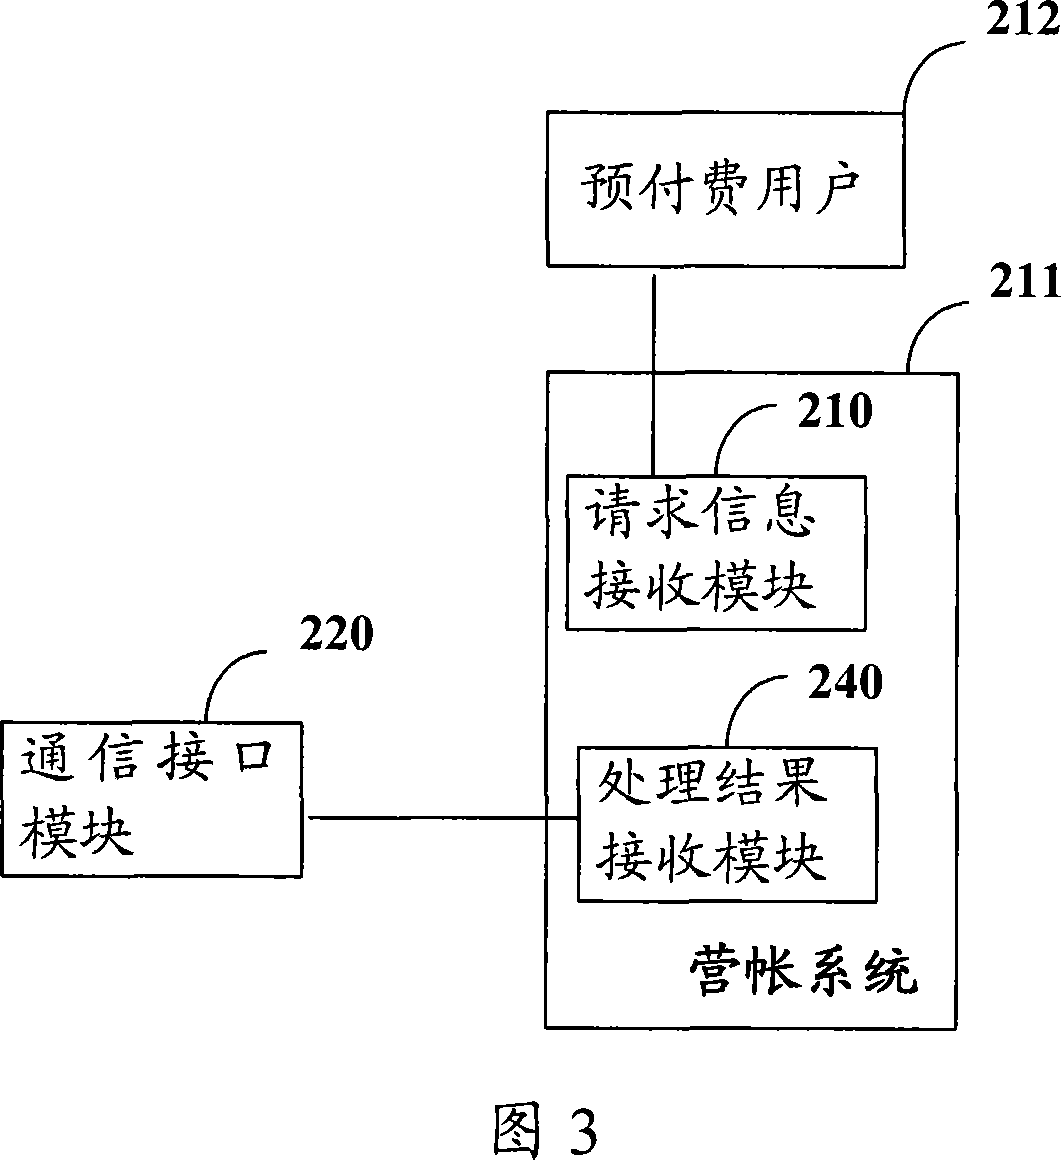 Method and system for processing prepaid network and postpaid network service